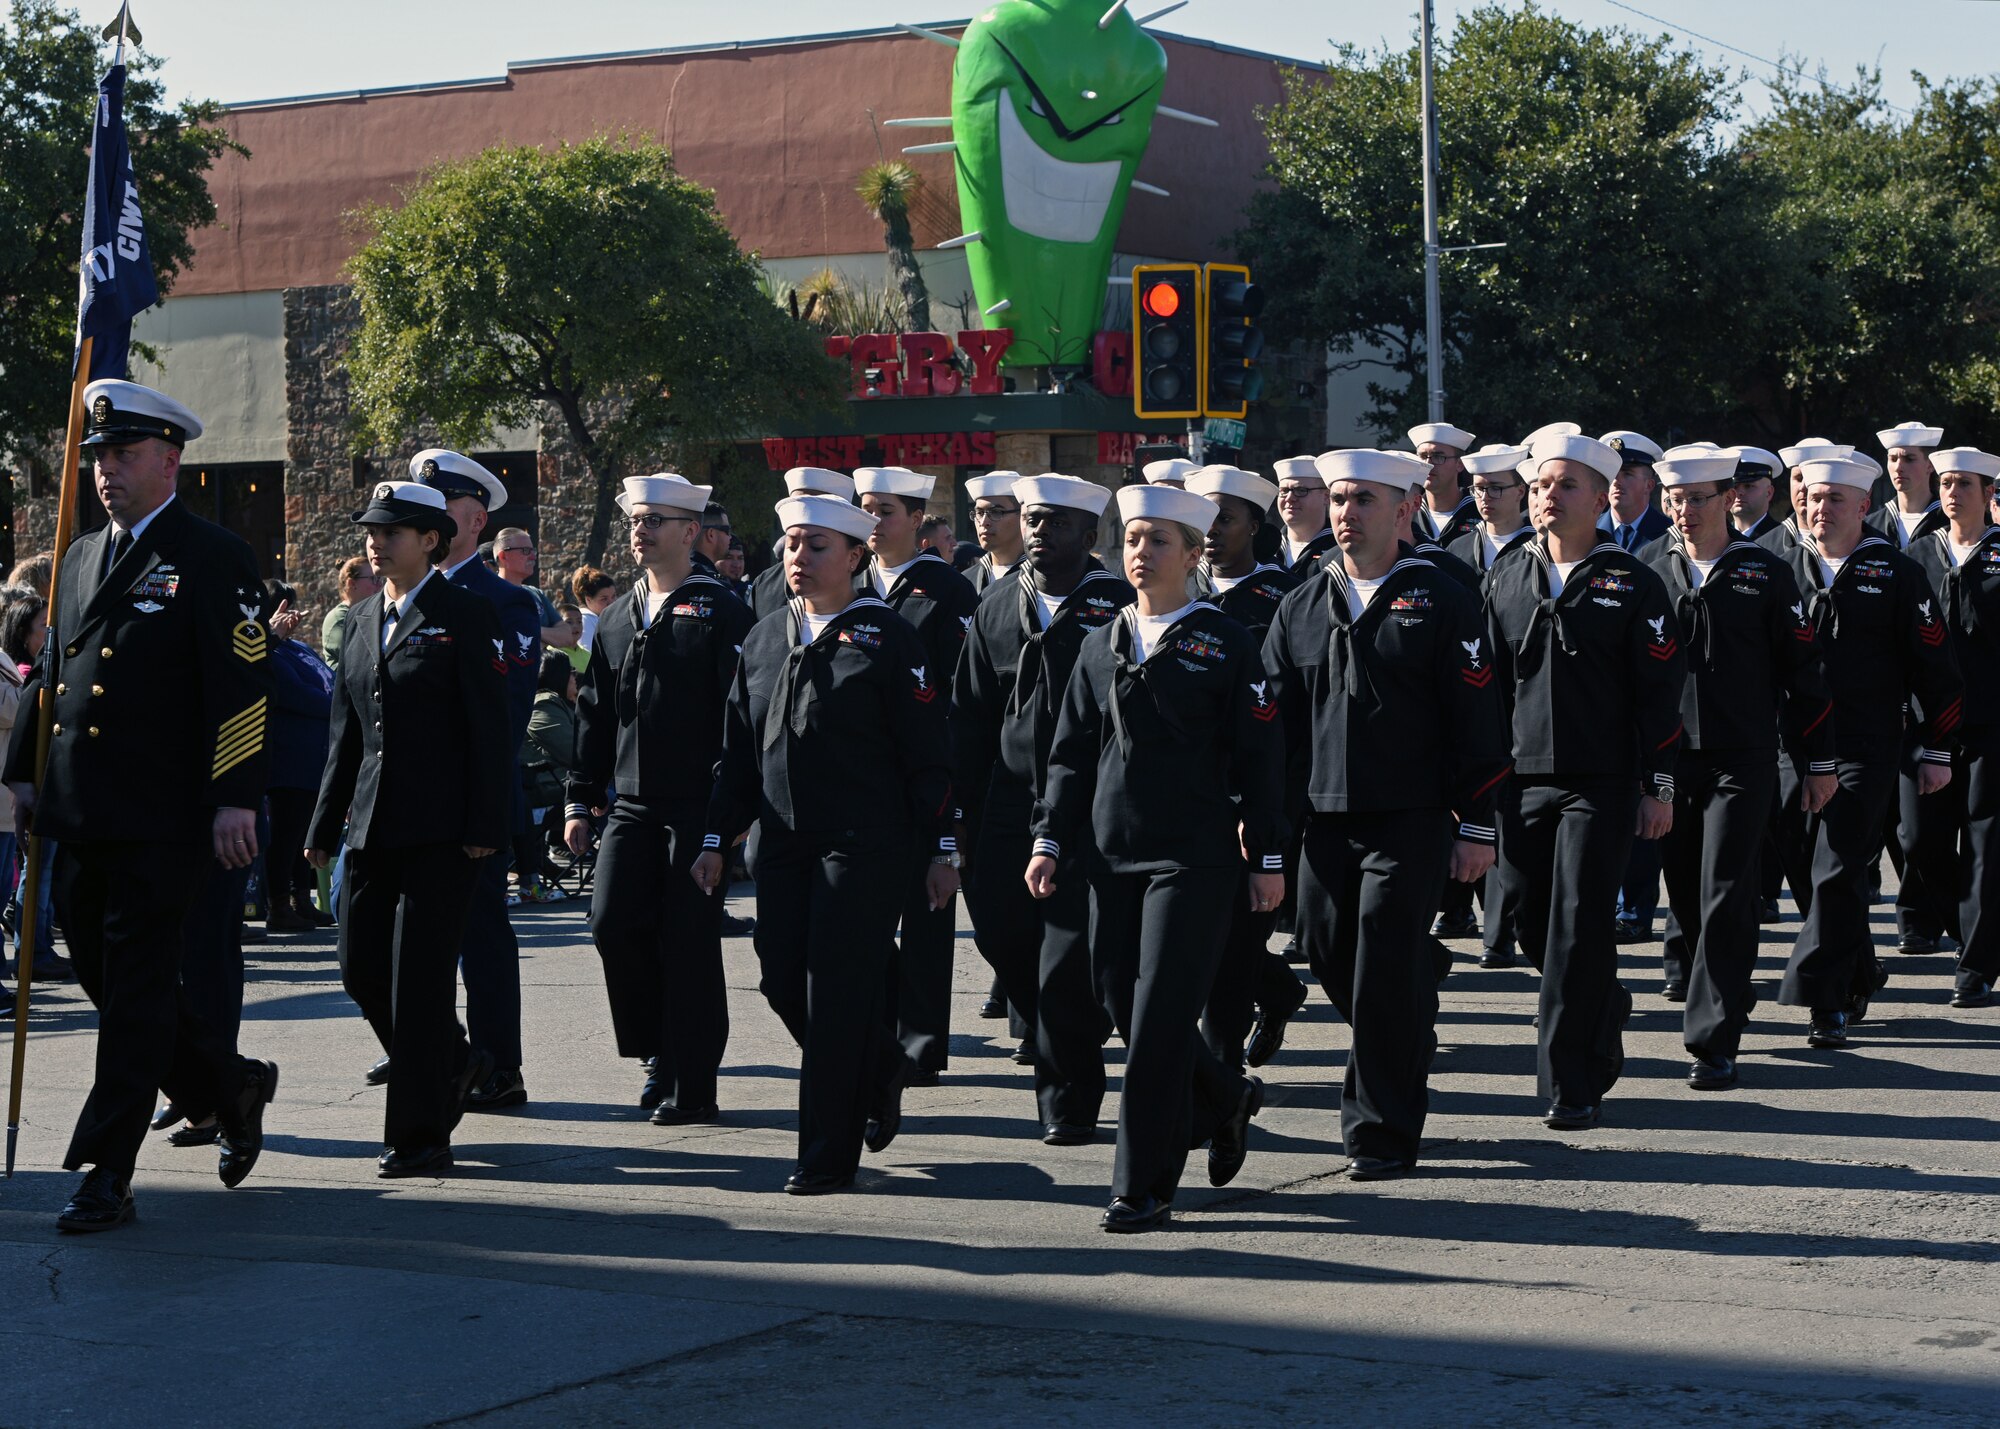 U.S. Navy sailors stationed at Goodfellow Air Force Base, march during the Veterans Day Parade in San Angelo, Texas, Nov. 9, 2019. All branches of the U.S. Armed Forces were represented throughout the parade to honor all those who have served. (U.S. Air Force photo by Airman 1st Class Robyn Hunsinger/Released)